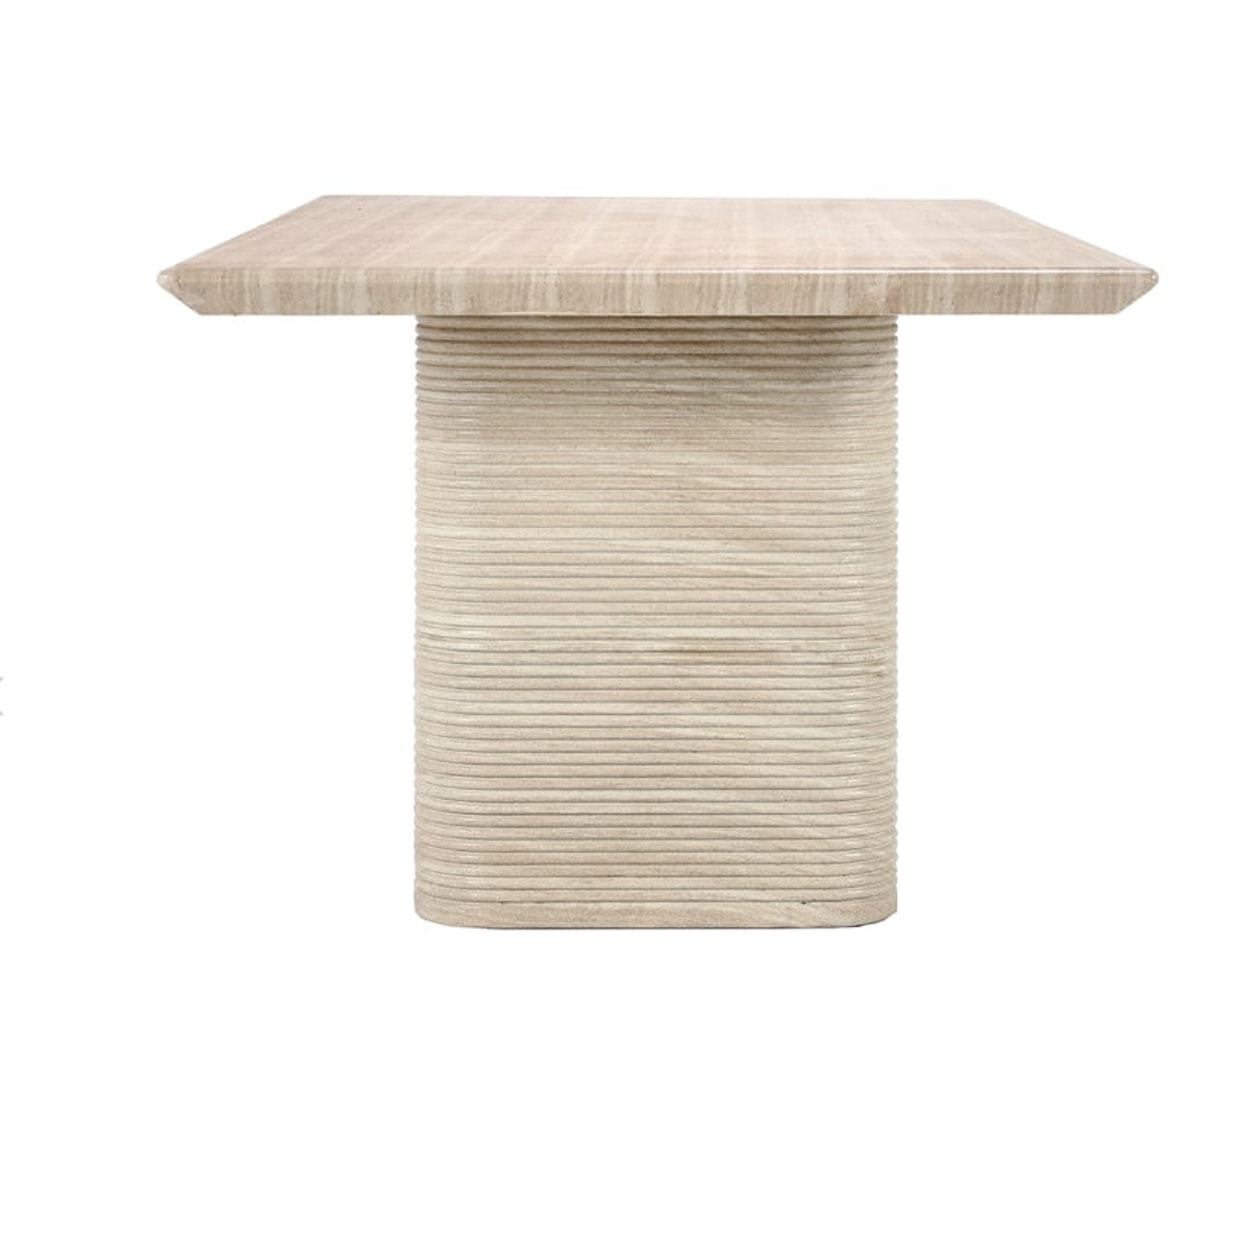 Classic Home Dining Tables Aiden 87" Outdoor Dining Table- Beige